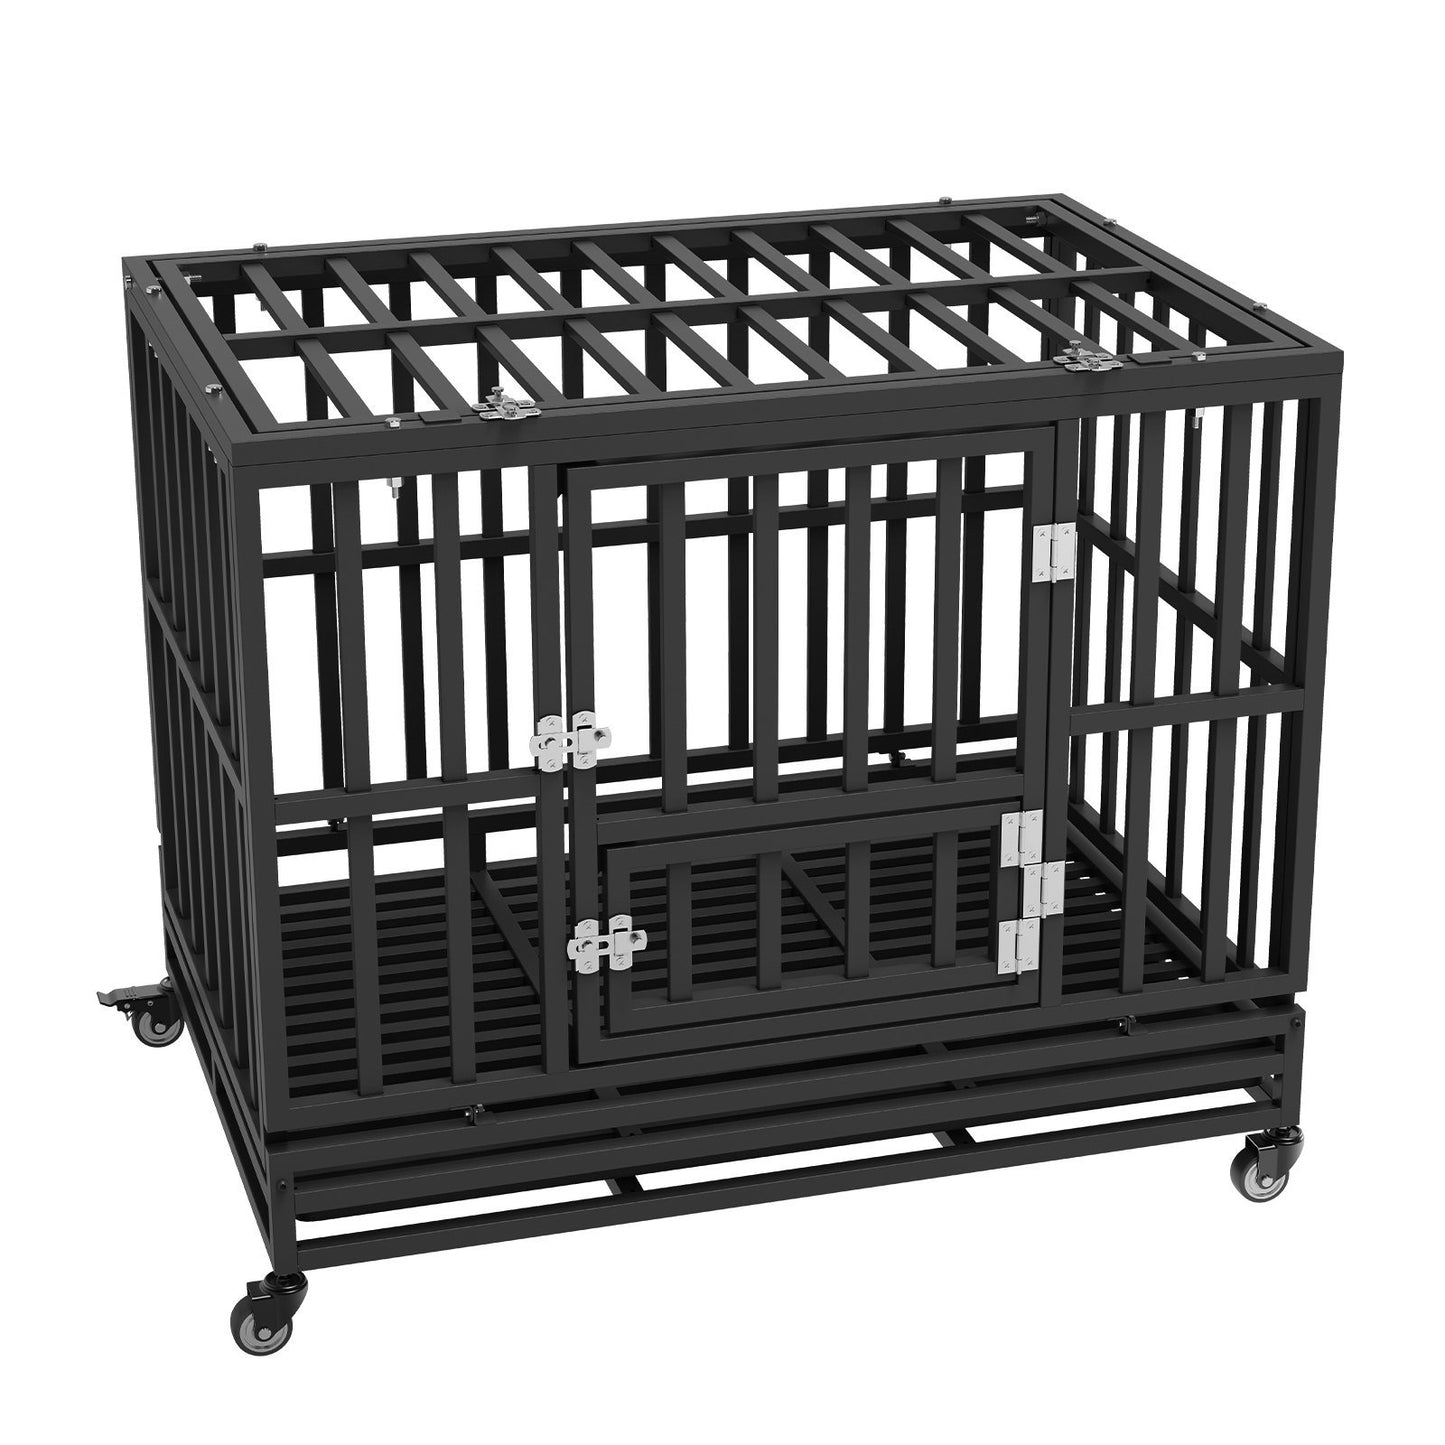 38 Inch Heavy Duty Dog Crate, Indestructible Dog Crate, 3-Door Heavy Duty Dog Kennel for Medium to Large Dogs with Lockable Wheels and Removable Tray, High Anxiety Dog Crate for Indoor & Outdoor